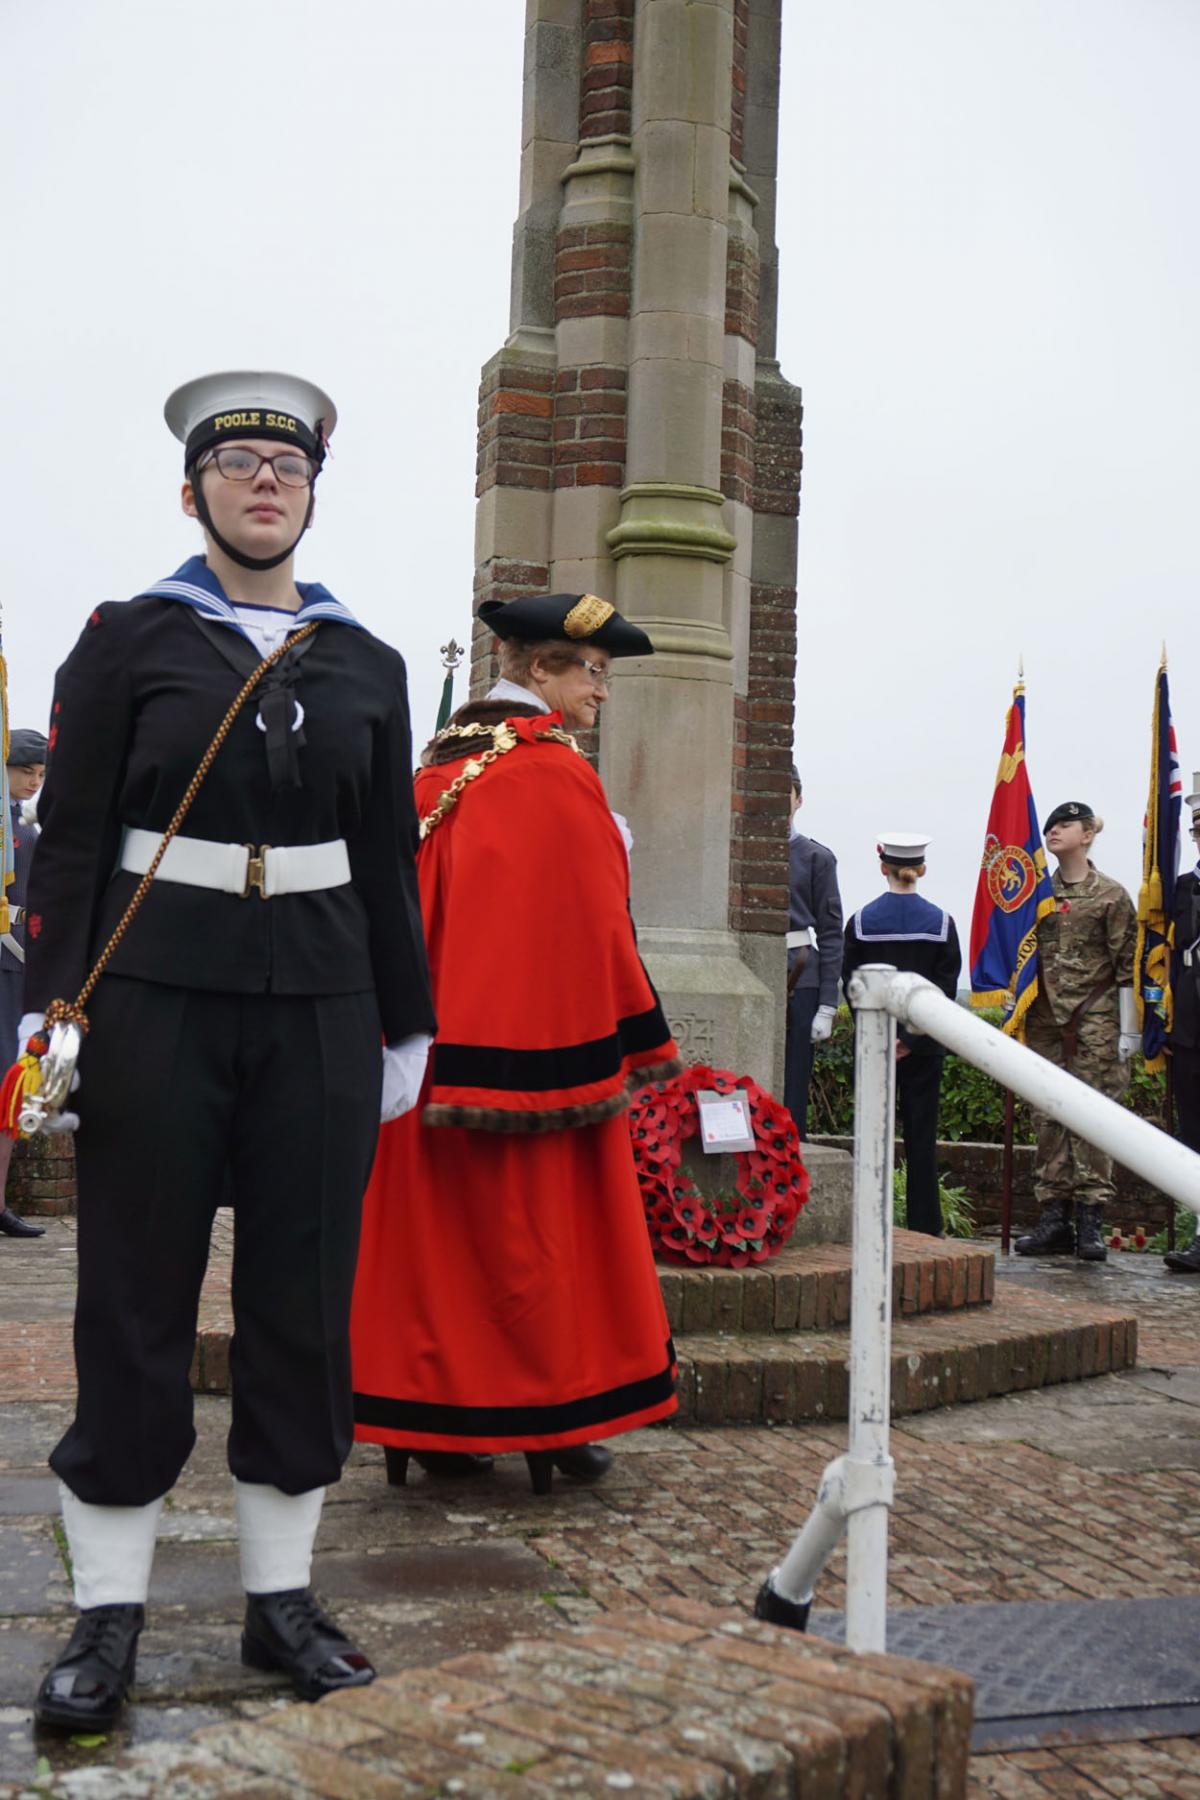 All the pictures from Poole Remembrance Day Parade 2015 